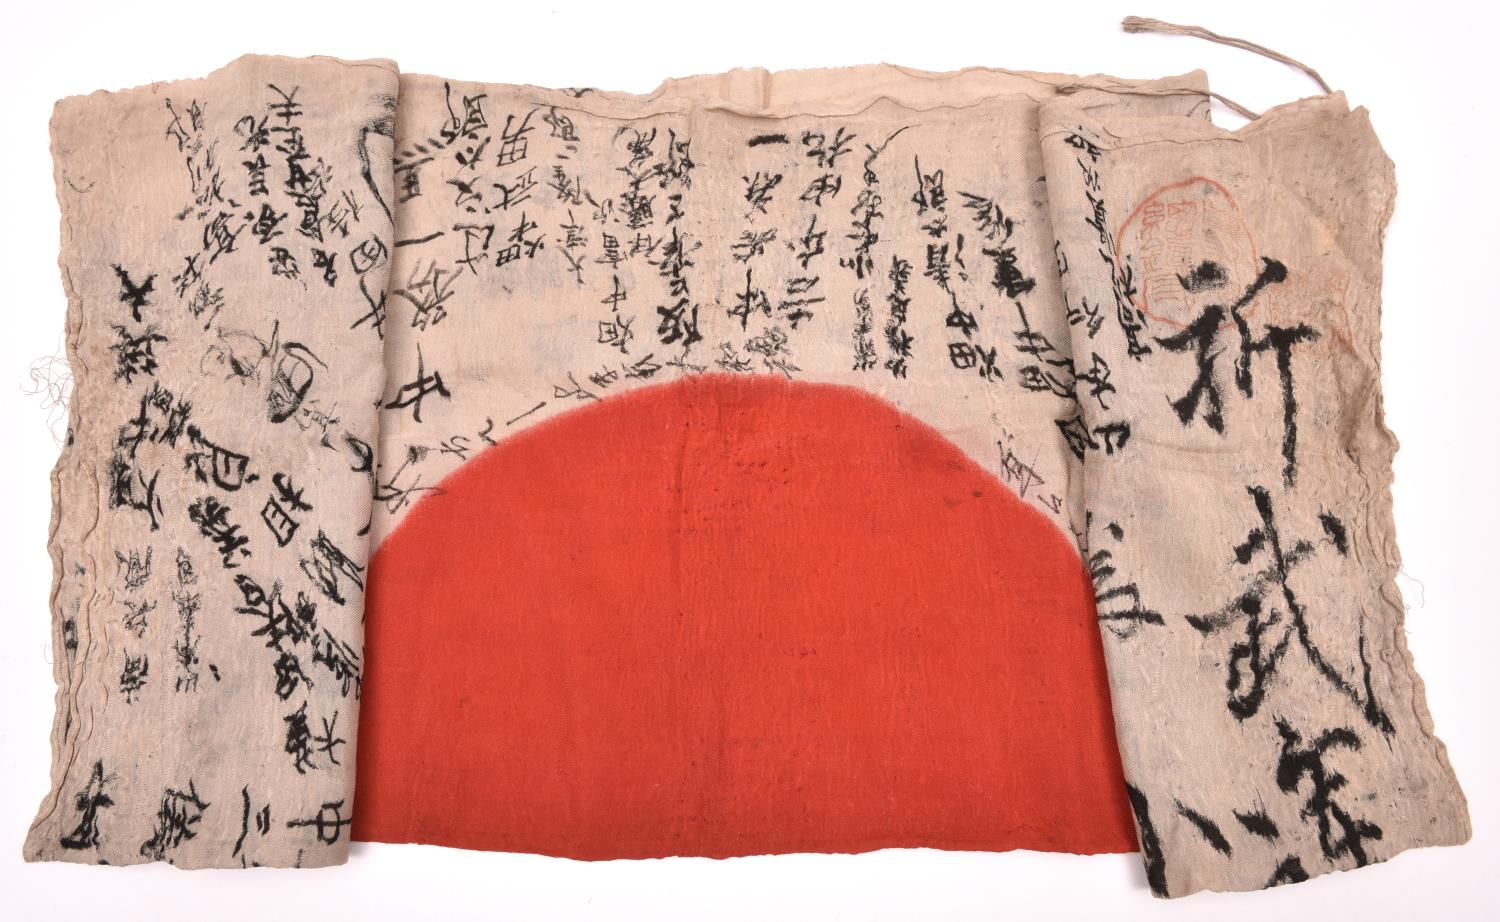 A scarce original WWII Japanese battle flag, 39” x 27”, having central red disc surrounded by